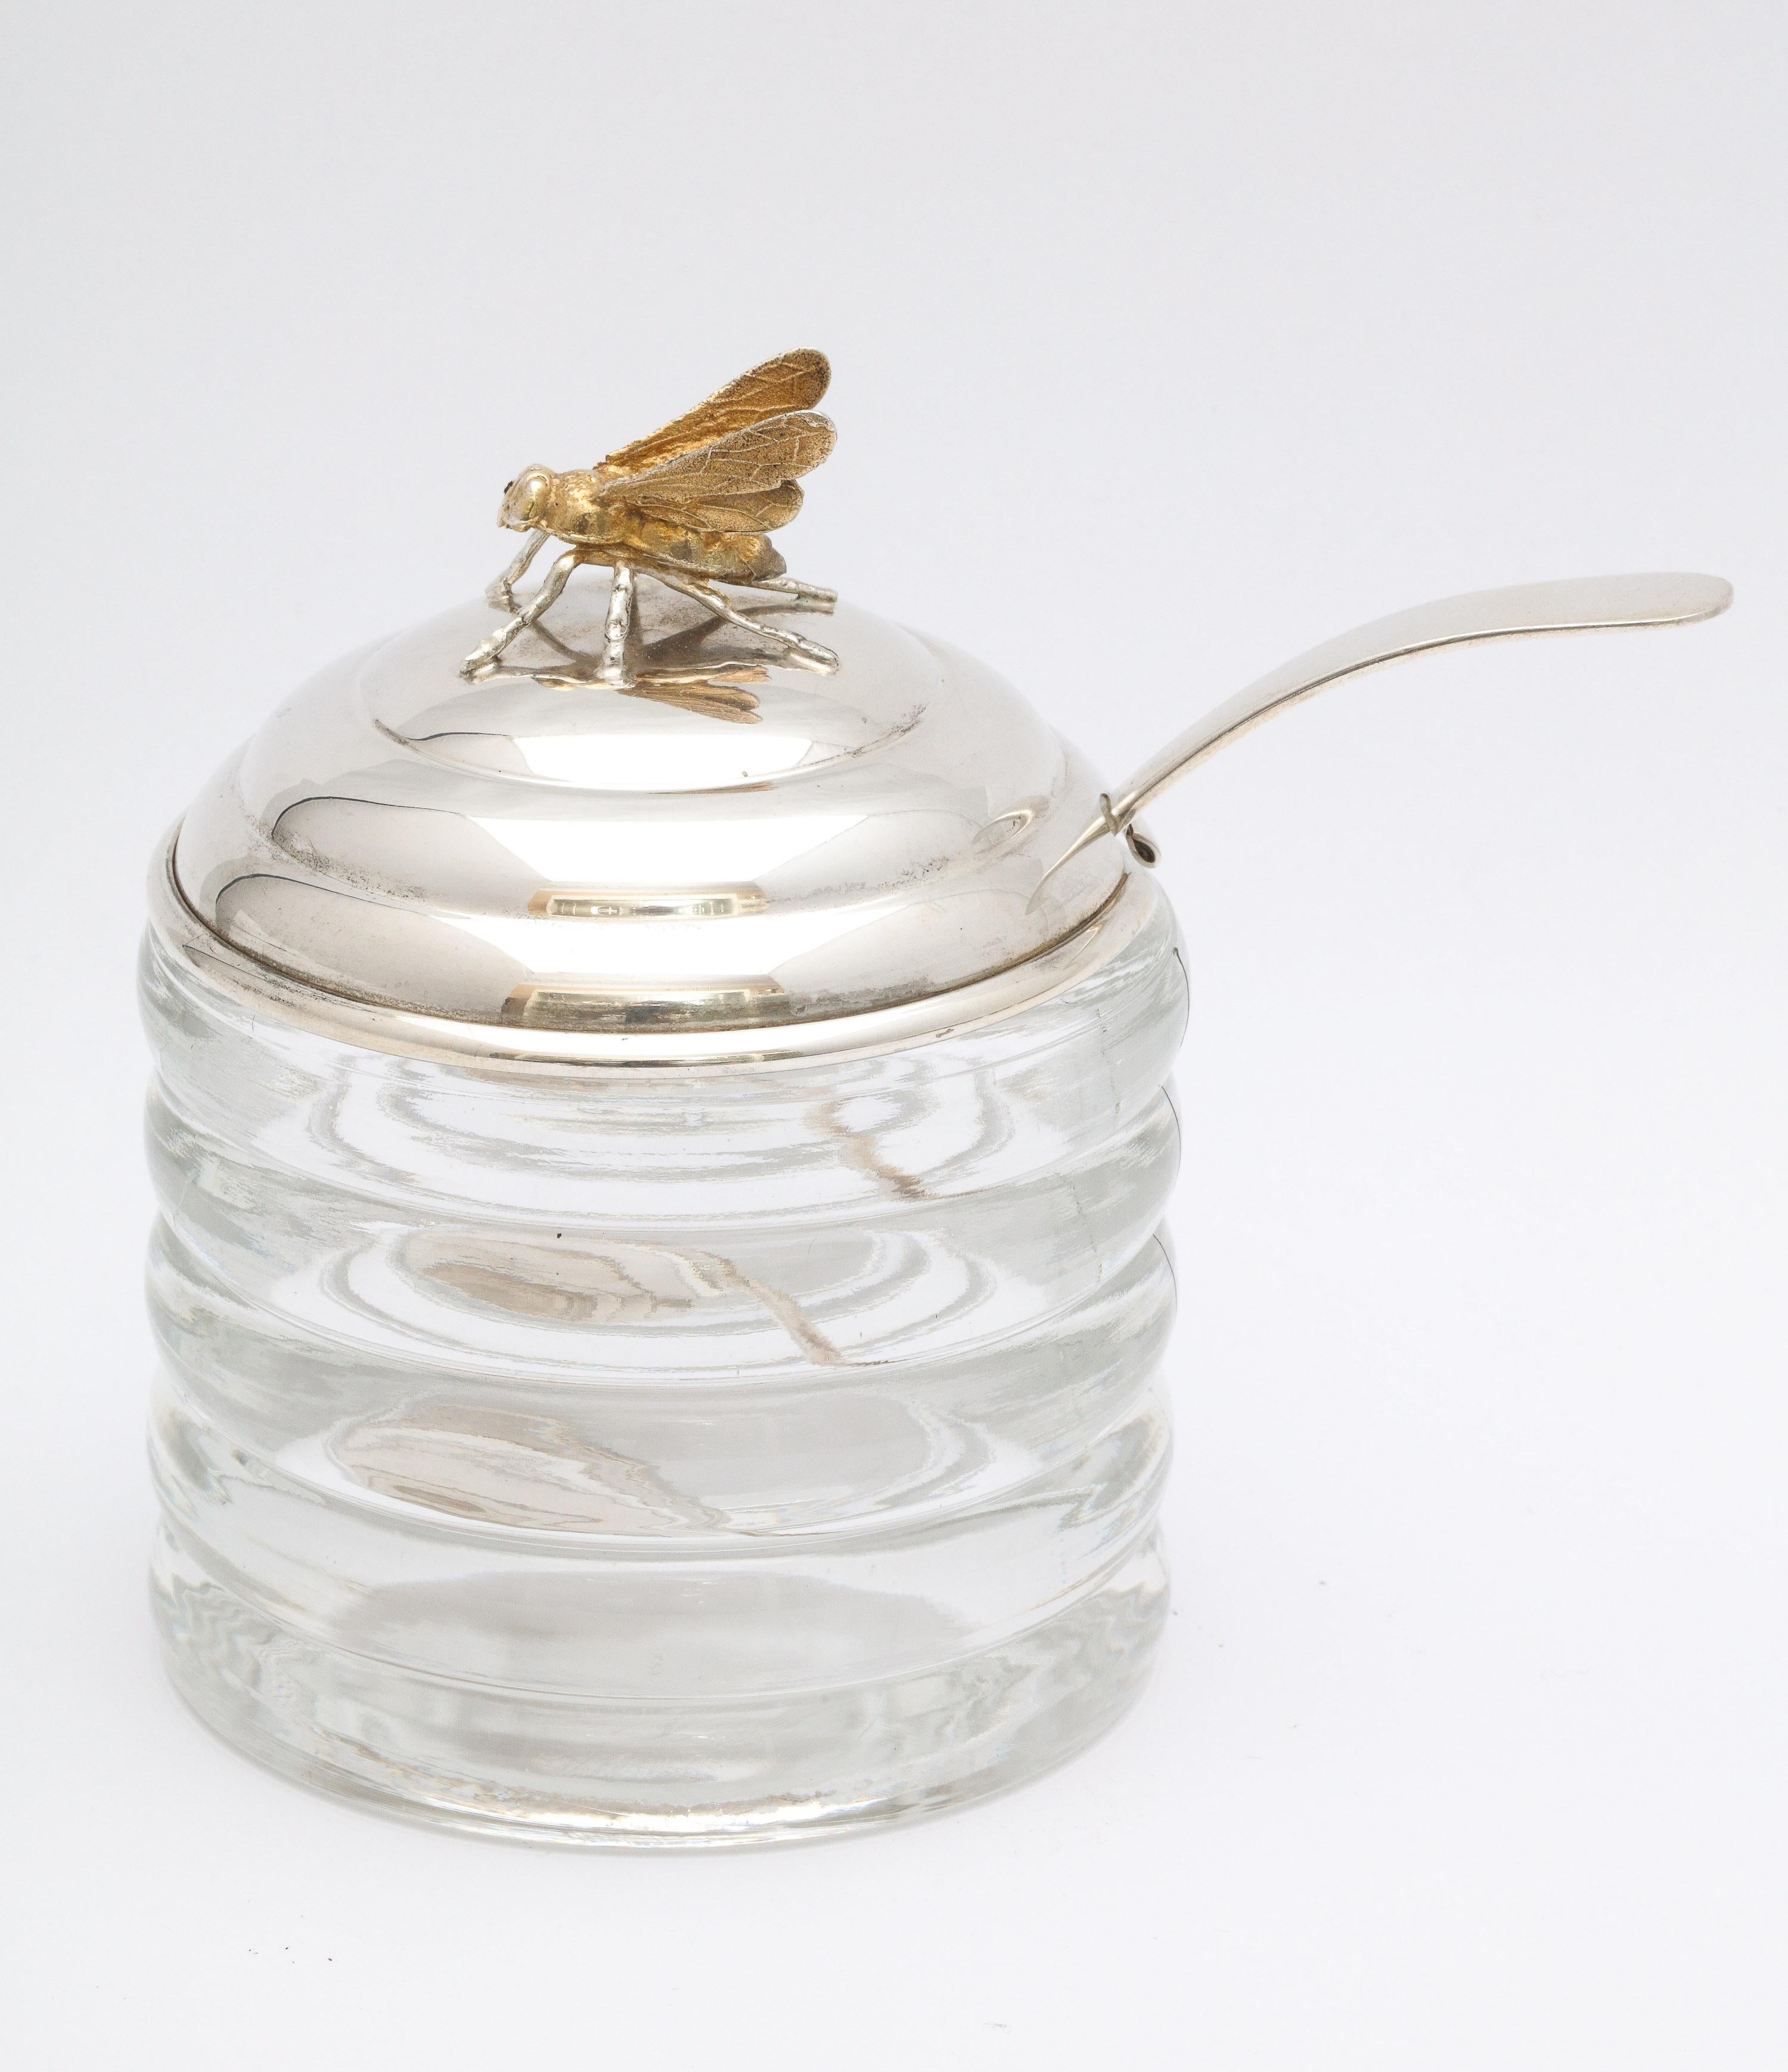 Gold Art Deco Sterling Silver-Mounted Beehive-Form Honey Jar